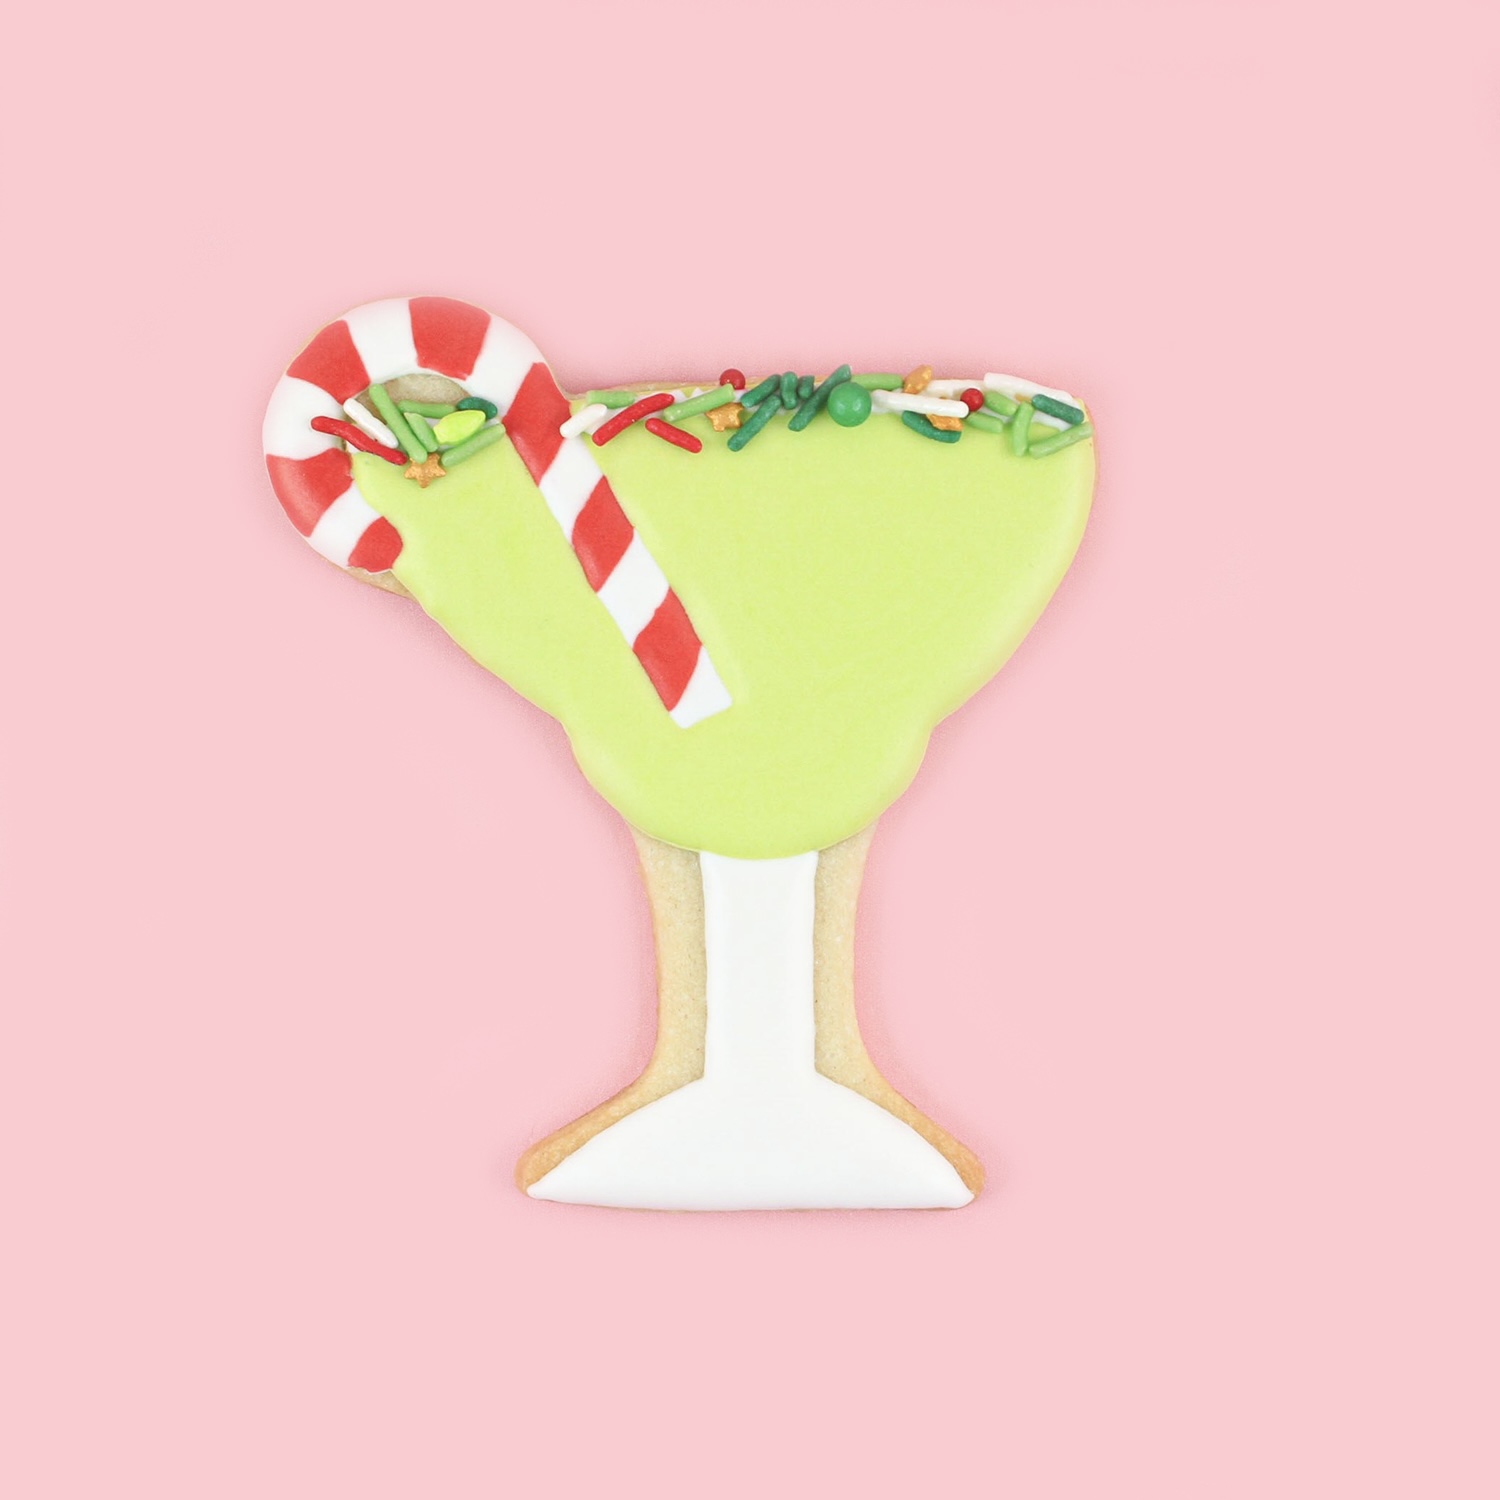 Royal icing decorated margarita cookie adorned with a candy cane